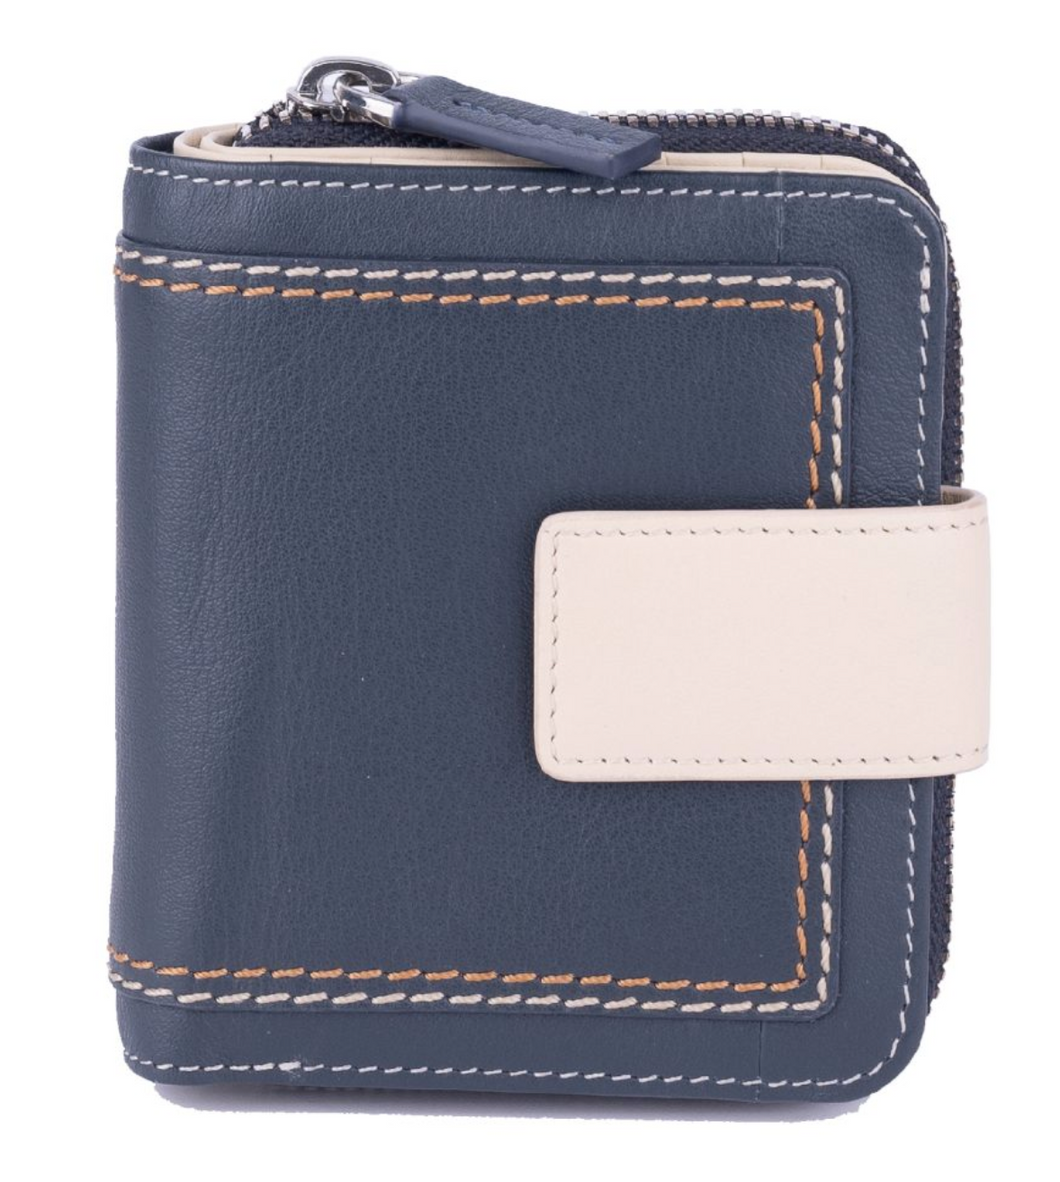 Two Tone Navy And Cream Leather Small Wallet Purse